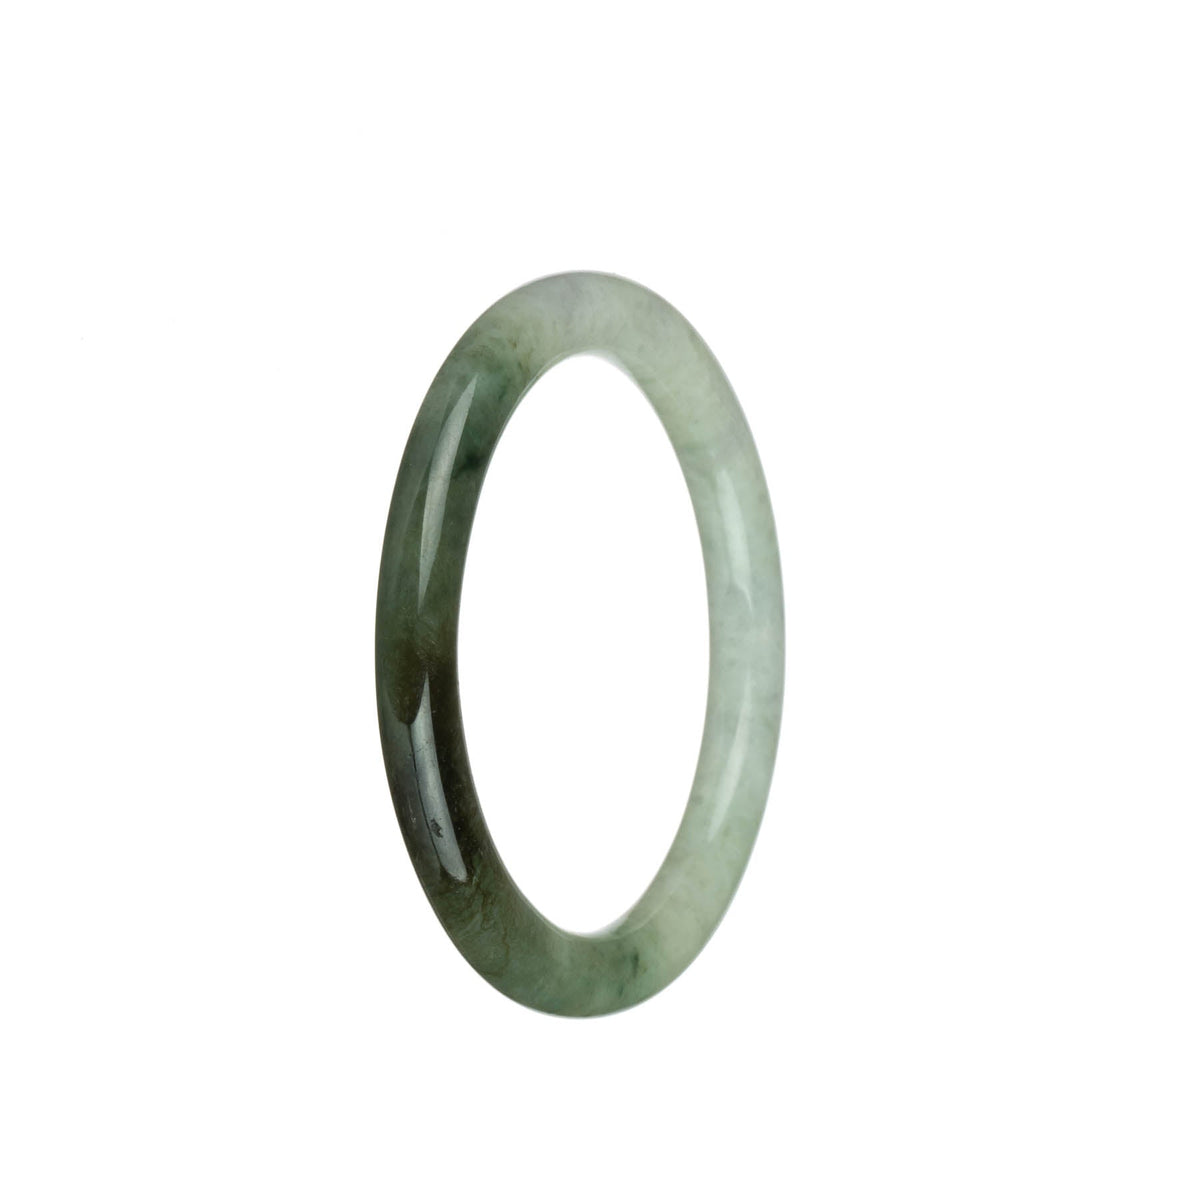 A small round traditional jade bangle with a certified grade A green and pale green color, featuring a unique brown patch. Perfect for a petite wrist, measuring 55mm. Made by MAYS™.